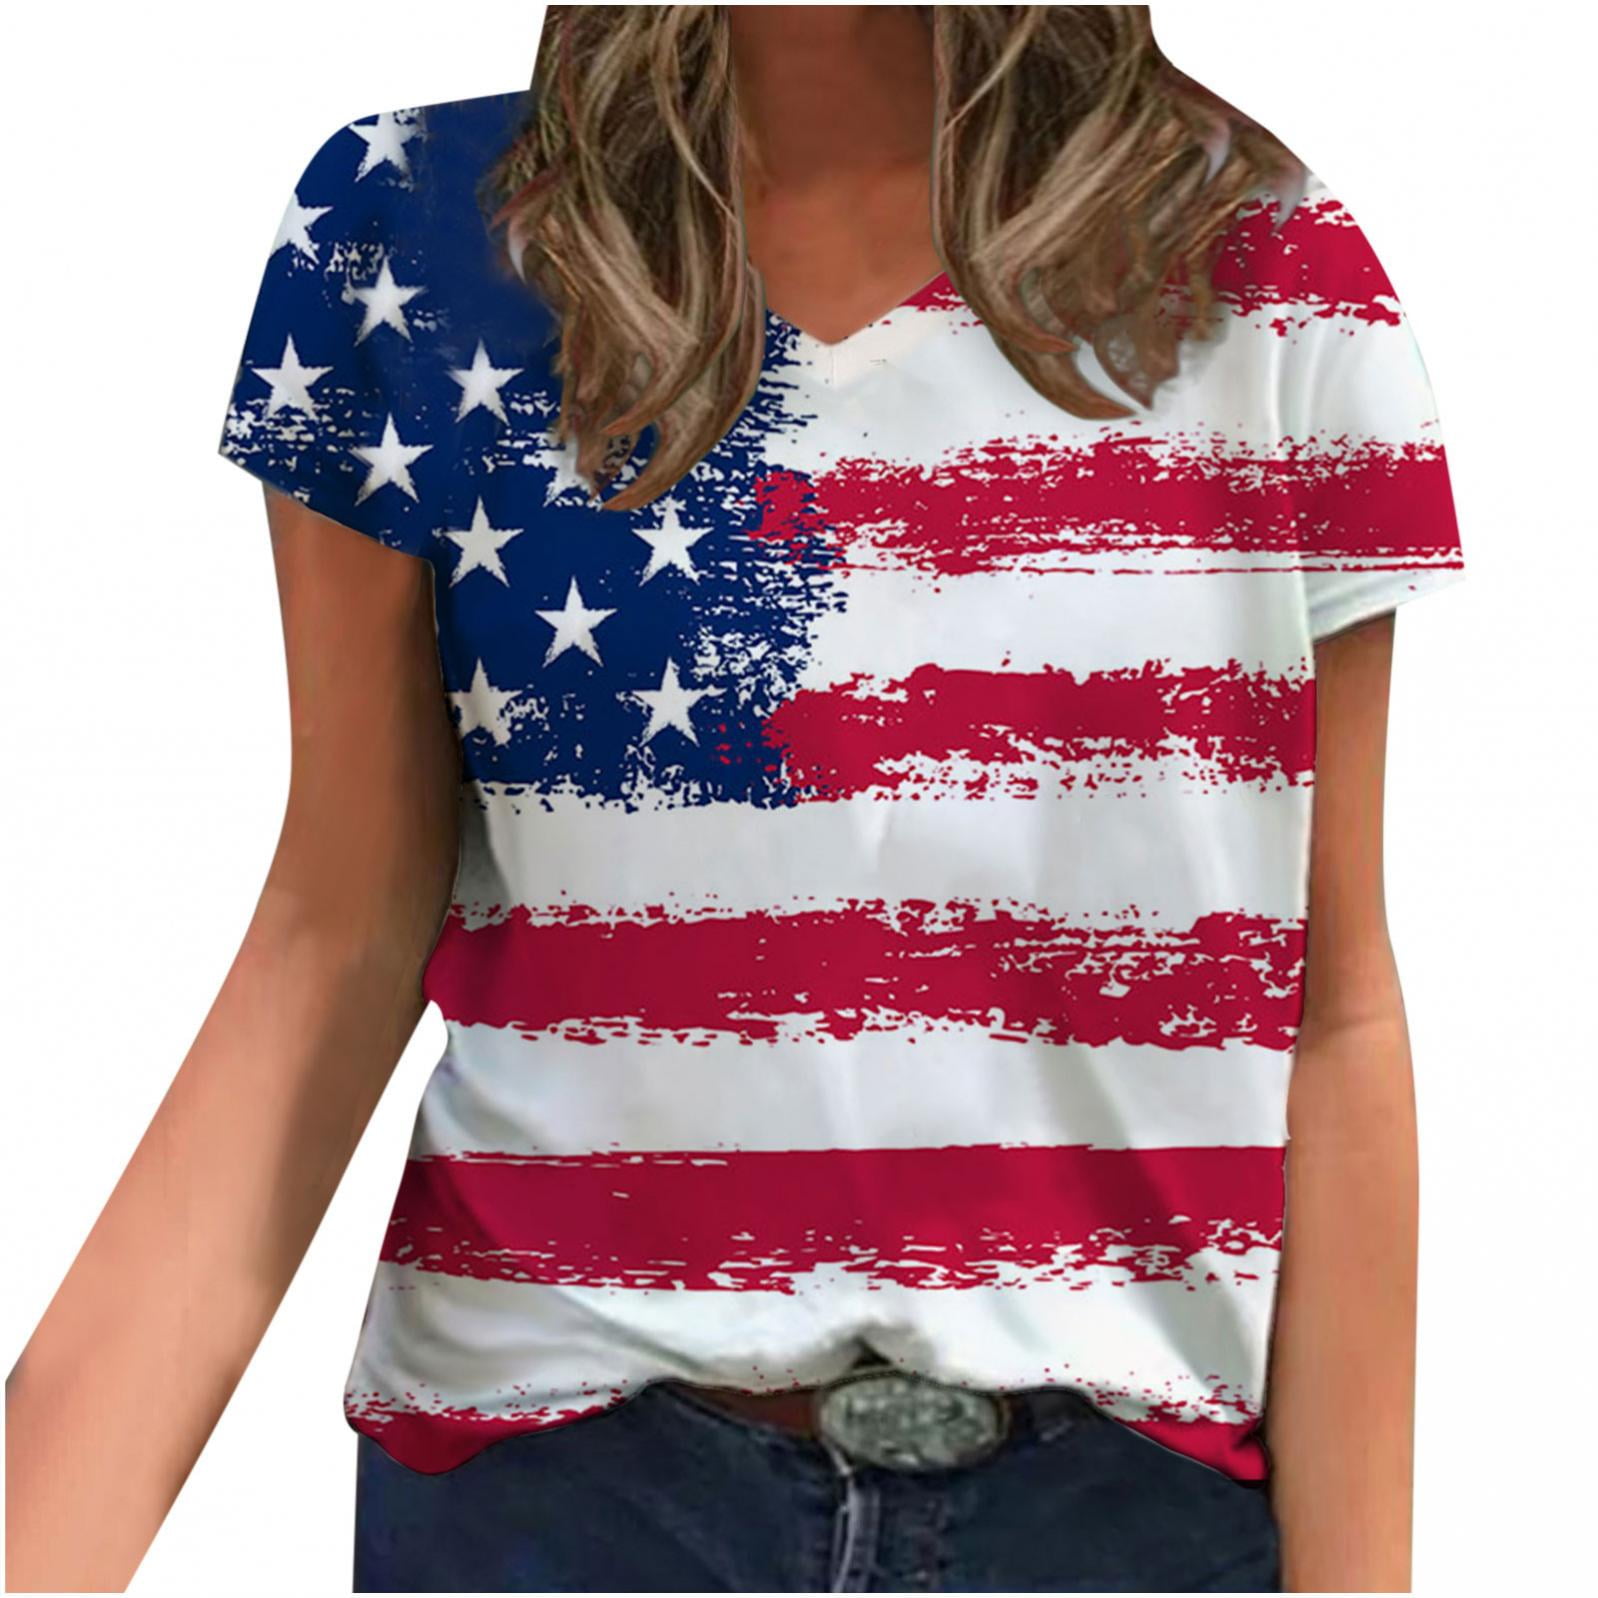 Deals of the Day,Jovati 4th of July Shirts Women Faith Family Freedom ...